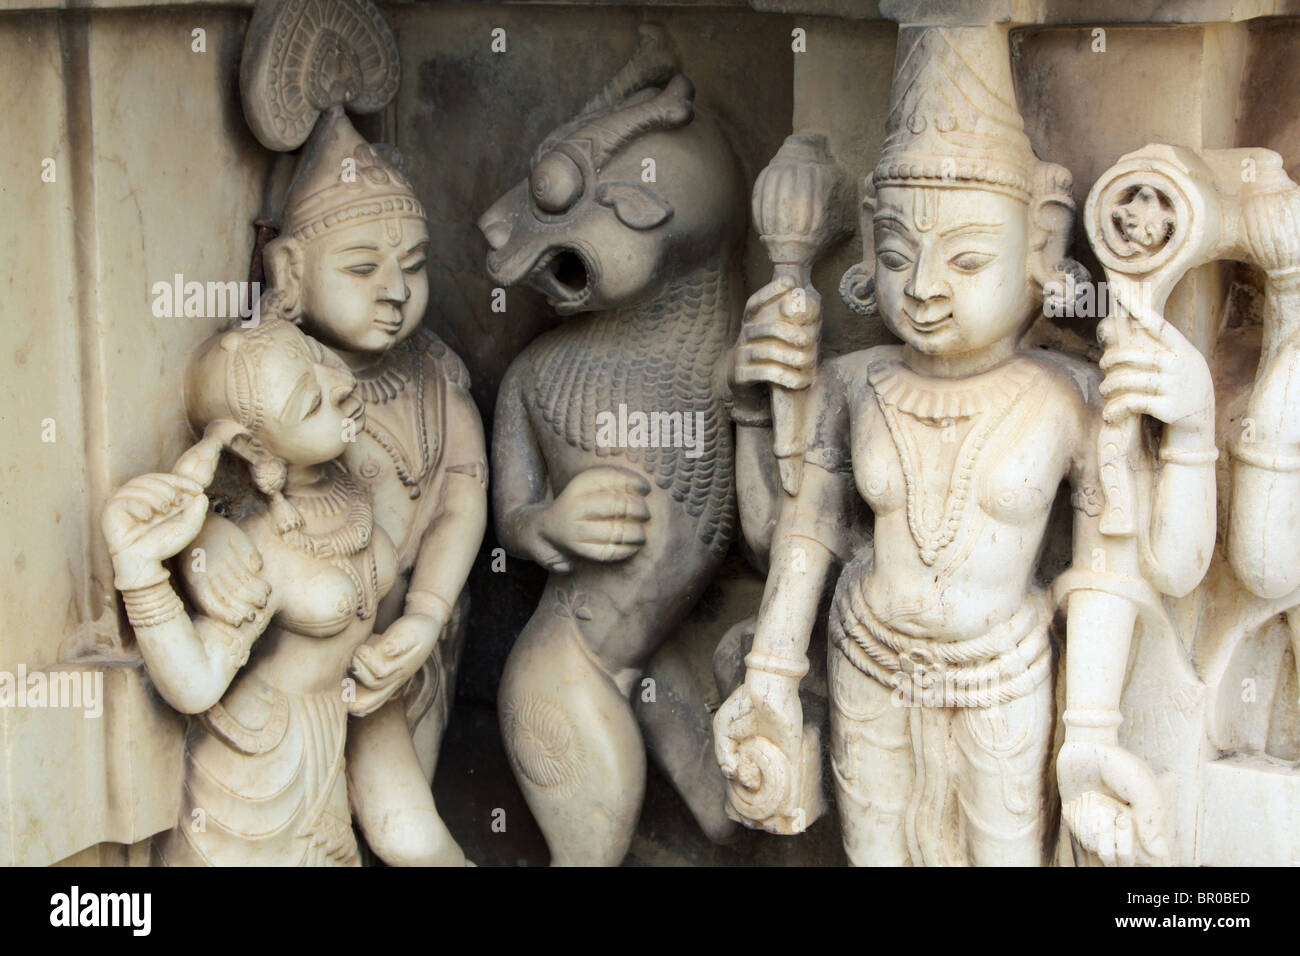 Ancient white stone sculptures of Krishna and other gods and creatures decorating a Hindu temple in Udaipur, Rajasthan, India. Stock Photo